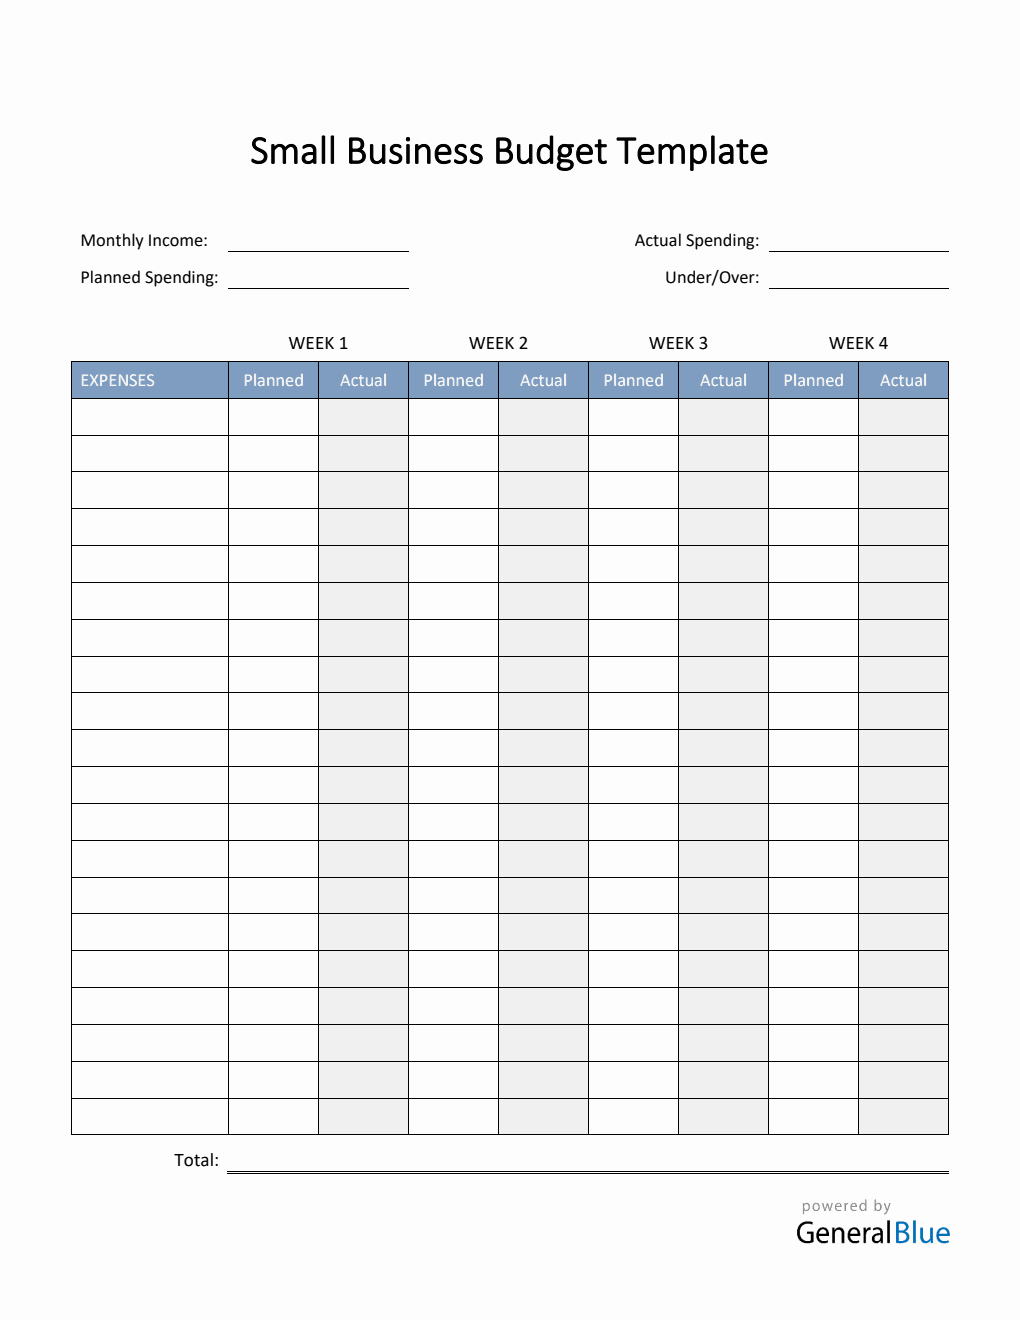 Small Business Budget Template in Word (Basic)